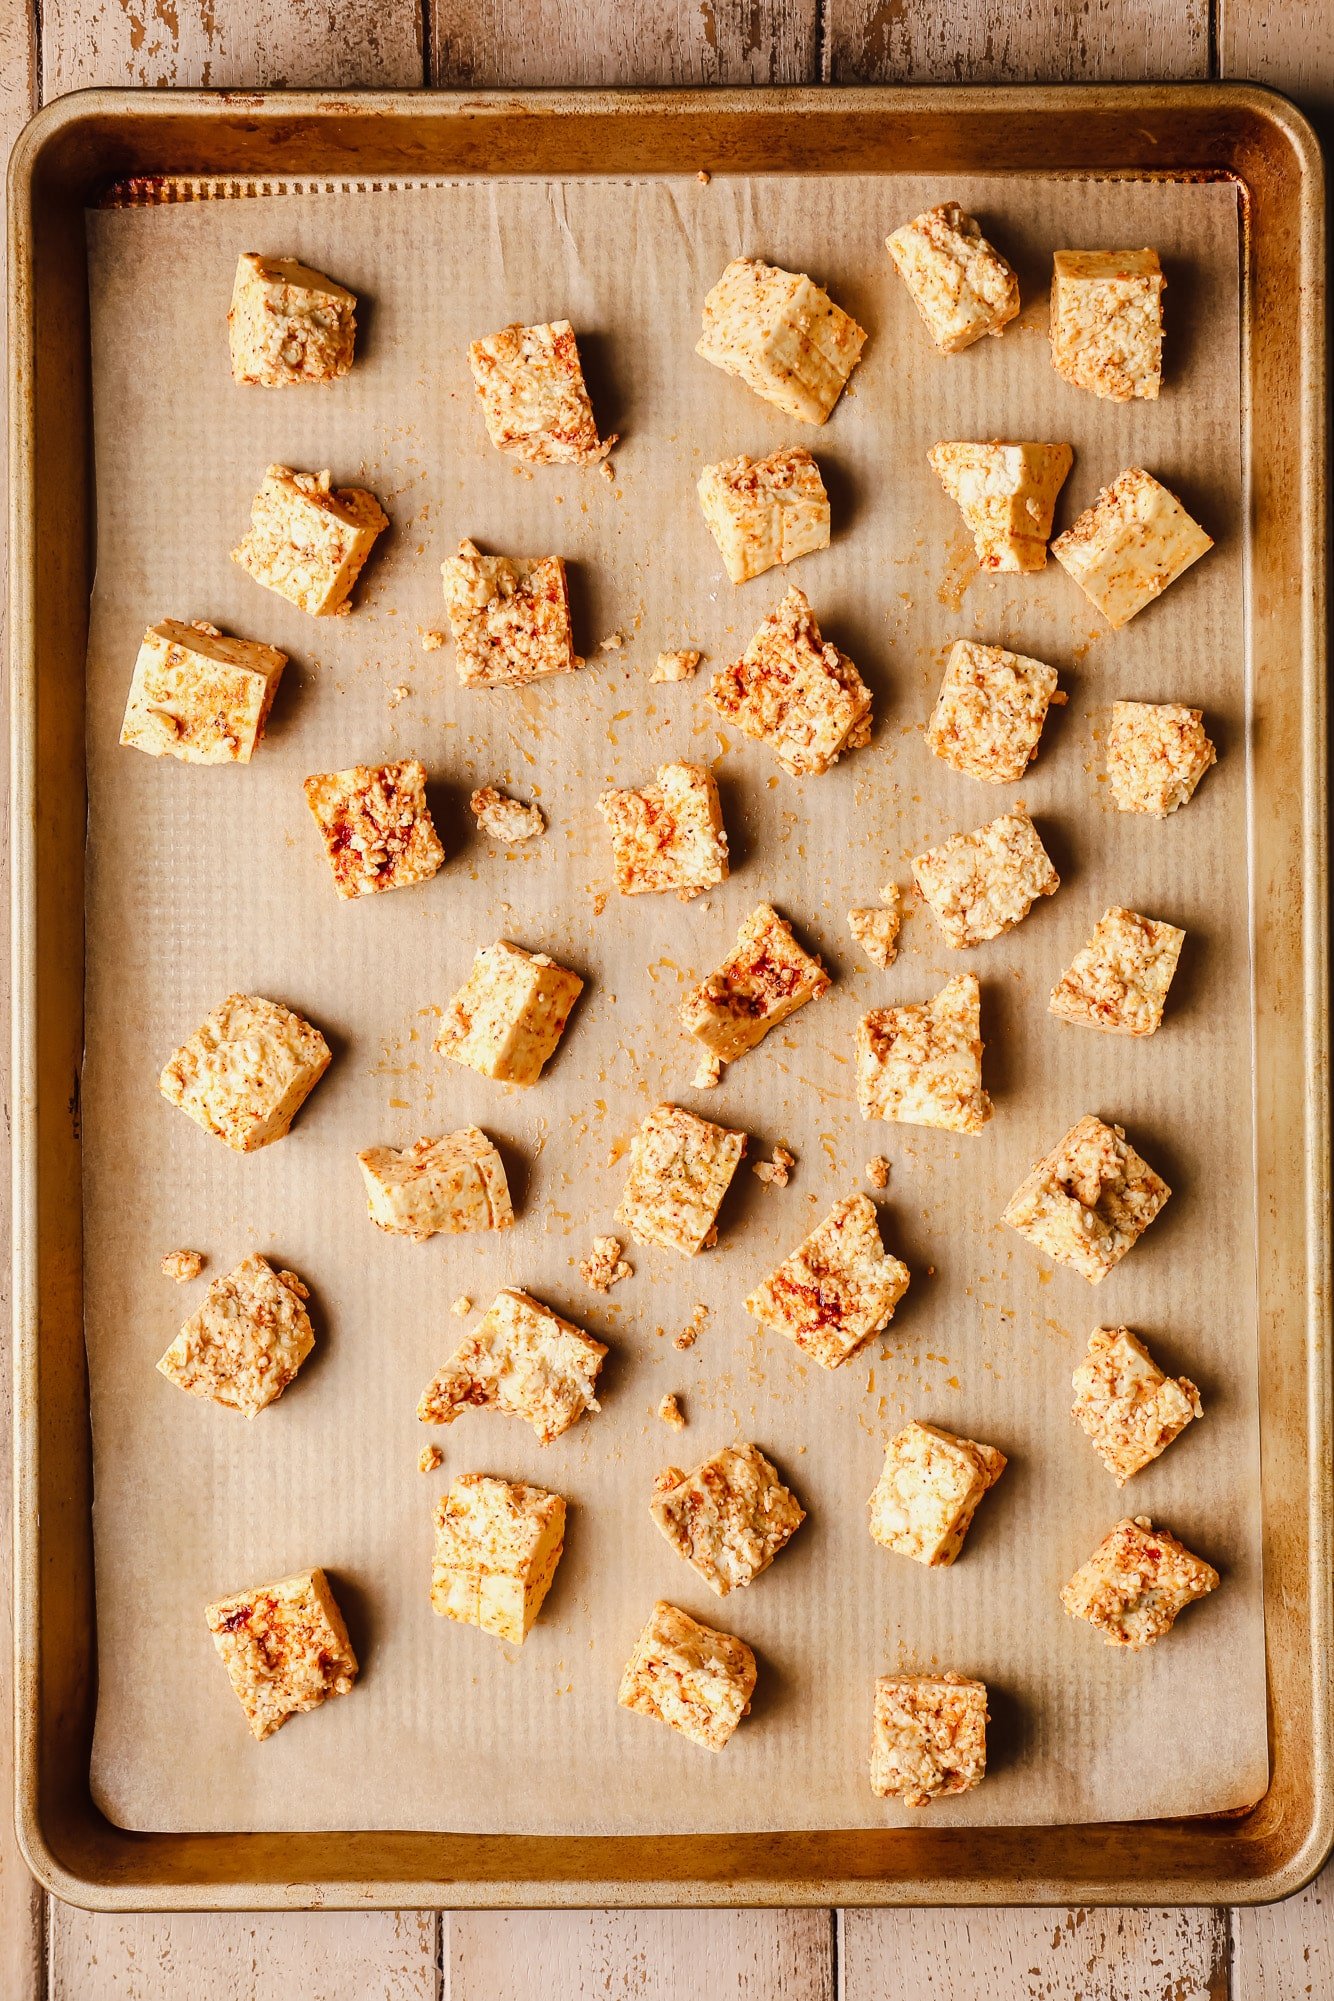 seasoned raw tofu pieces in rows on a baking sheet.